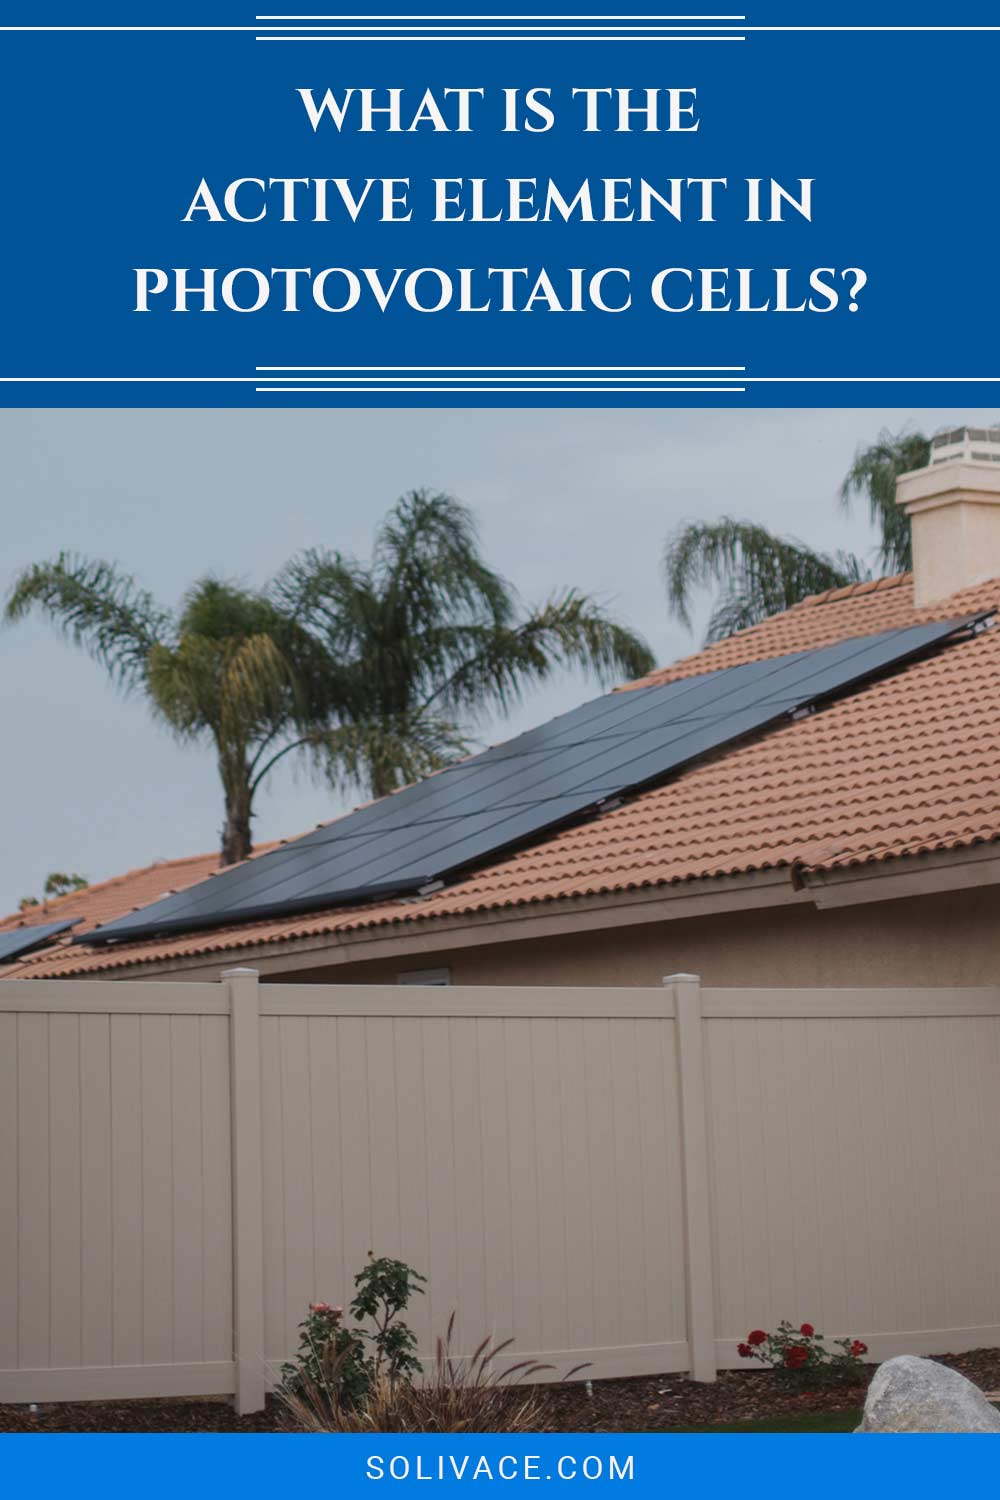 What Is The Active Element In Photovoltaic Cells?